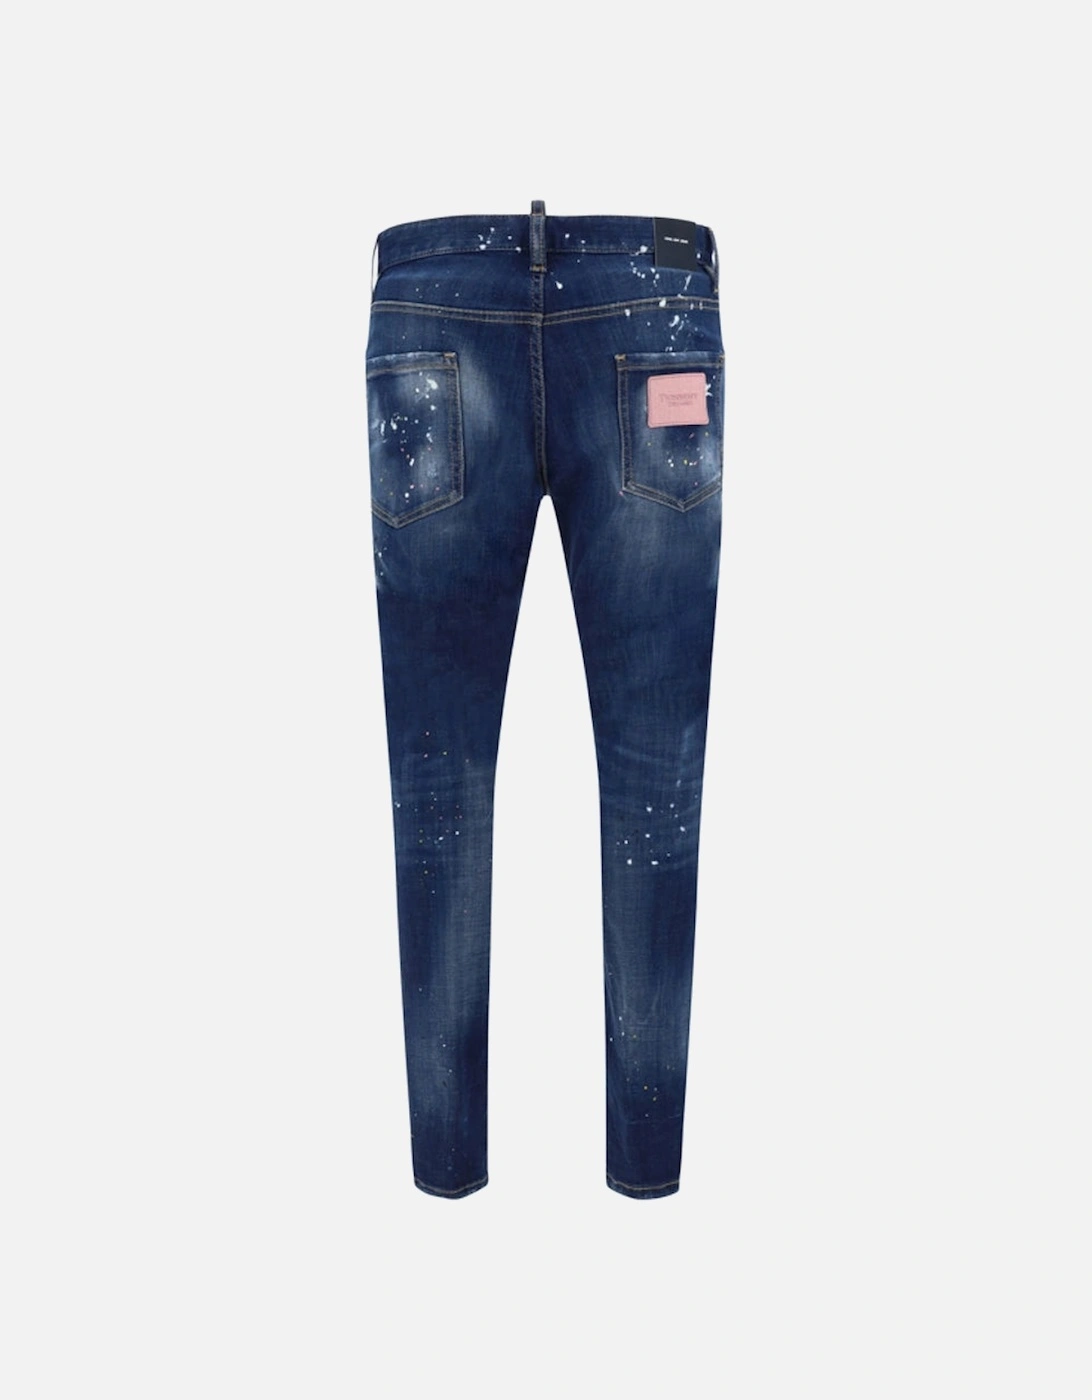 Twinphony Paint Splattered Jeans in Blue